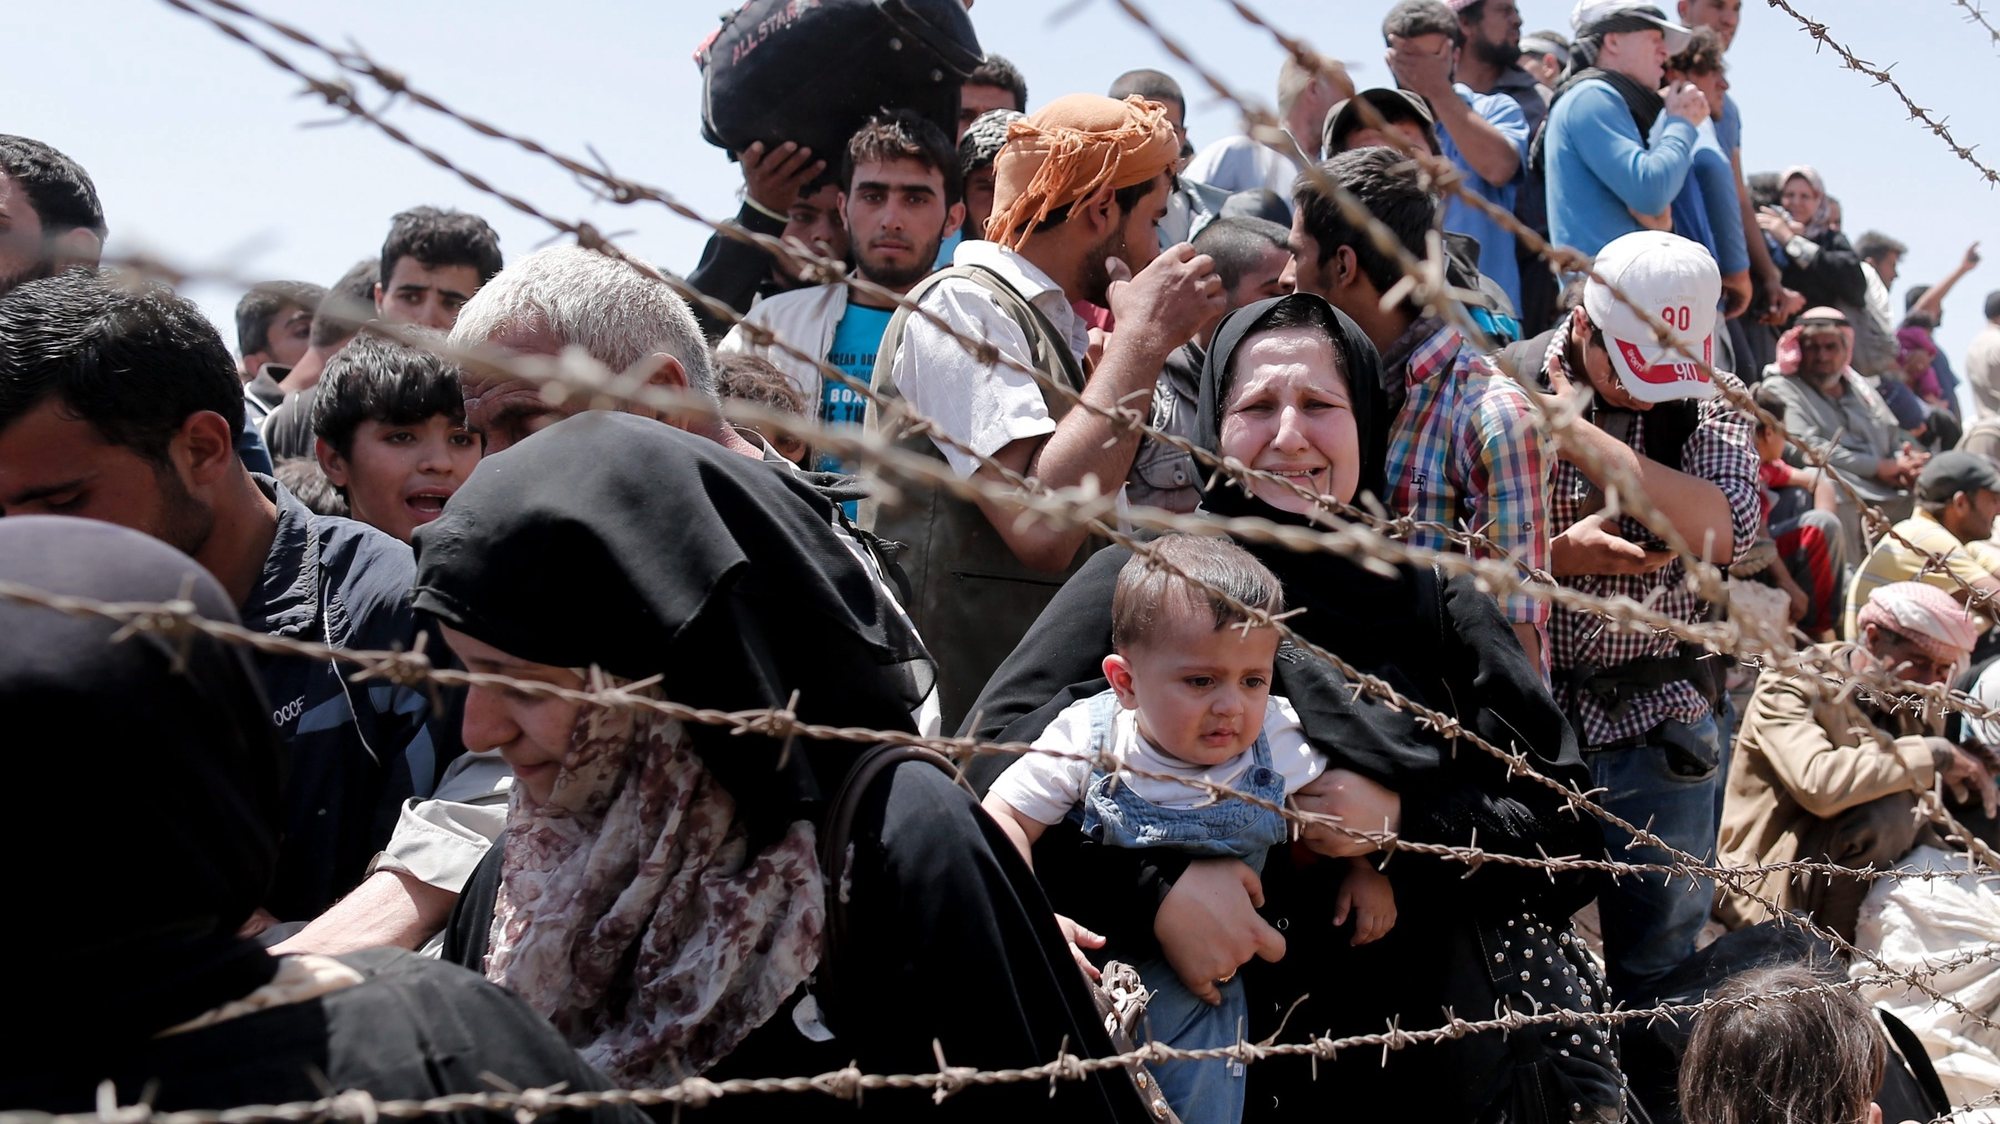 epa04791762 A picture taken from the Turkish side of the border between Turkey and Syria shows Syrian refugees waiting on the Syrian side of the border crossing near Akcakale, Sanliurfa province, south-eastern Turkey, 10 June 2015. More than 320,000 people are likely to have been killed in Syria&#039;s civil war, the Britain-based Syrian Observatory for Human Rights monitoring group said on 09 June. The organization said said it had been able to document the deaths of 230,618 people, including 69,494 civilians of whom more than 7,000 were children. The crisis in Syria started in March 2011 with peaceful demonstrations calling for more freedom from the repressive al-Assad regime, but quickly degenerated into violence after deadly crackdowns by security forces.  EPA/SEDAT SUNA